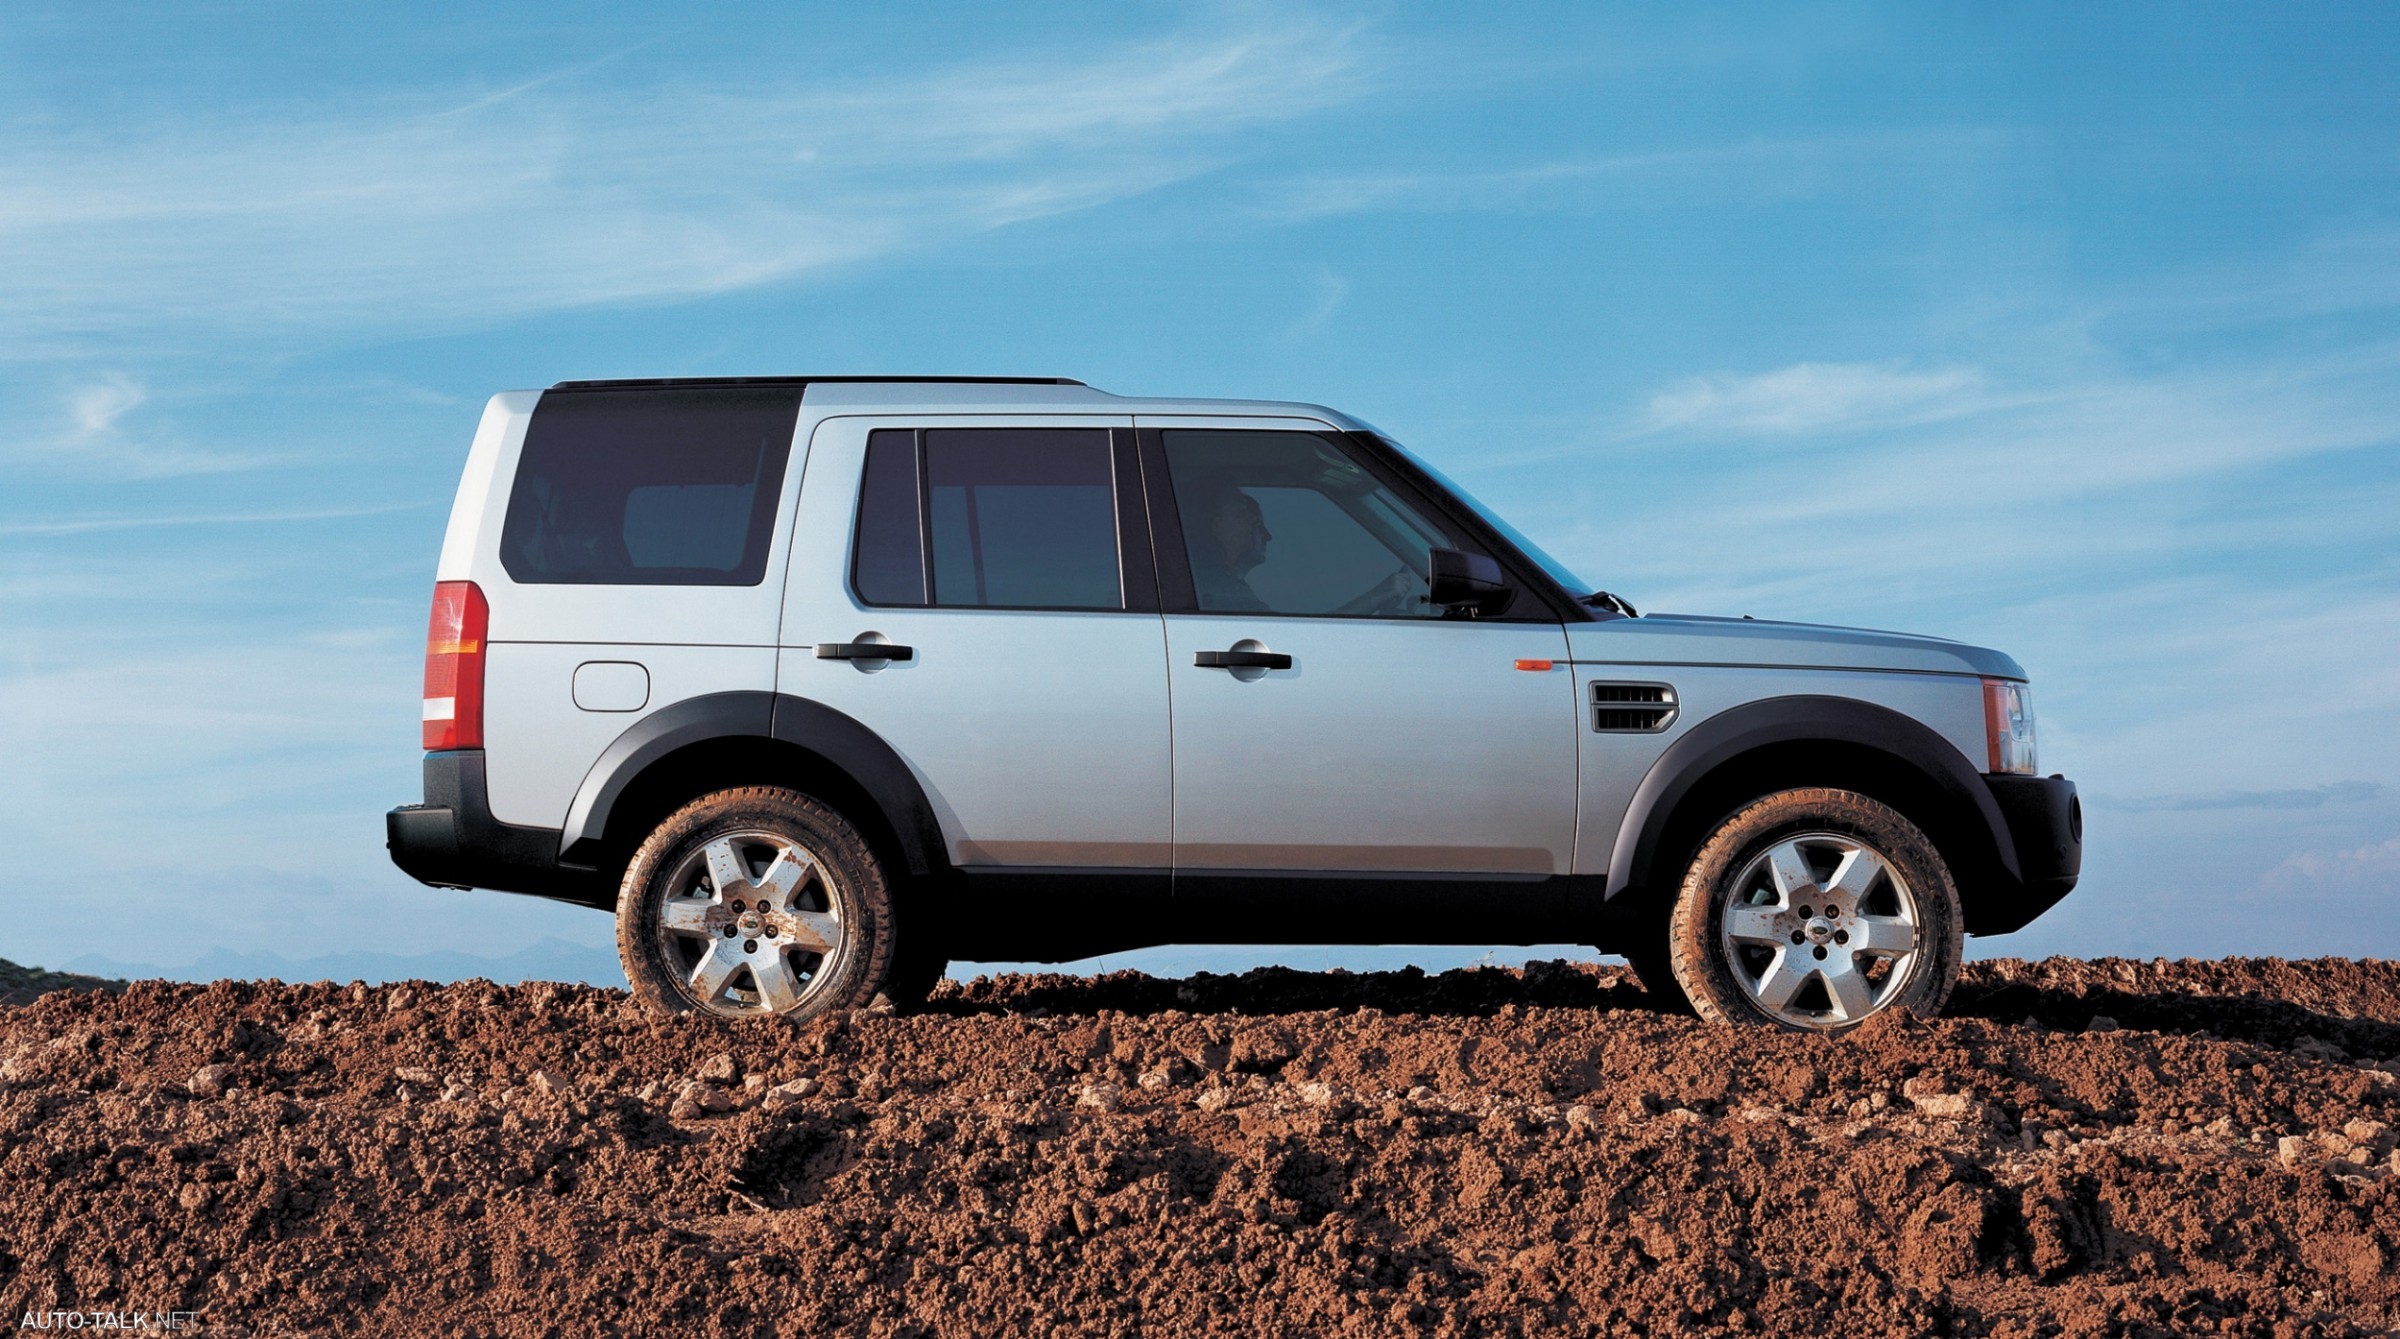 Дискавери 2007. Ленд Ровер Дискавери 3 2007. Land Rover Discovery 3. Land Rover lr3. Land Rover Discovery lr3 2005.